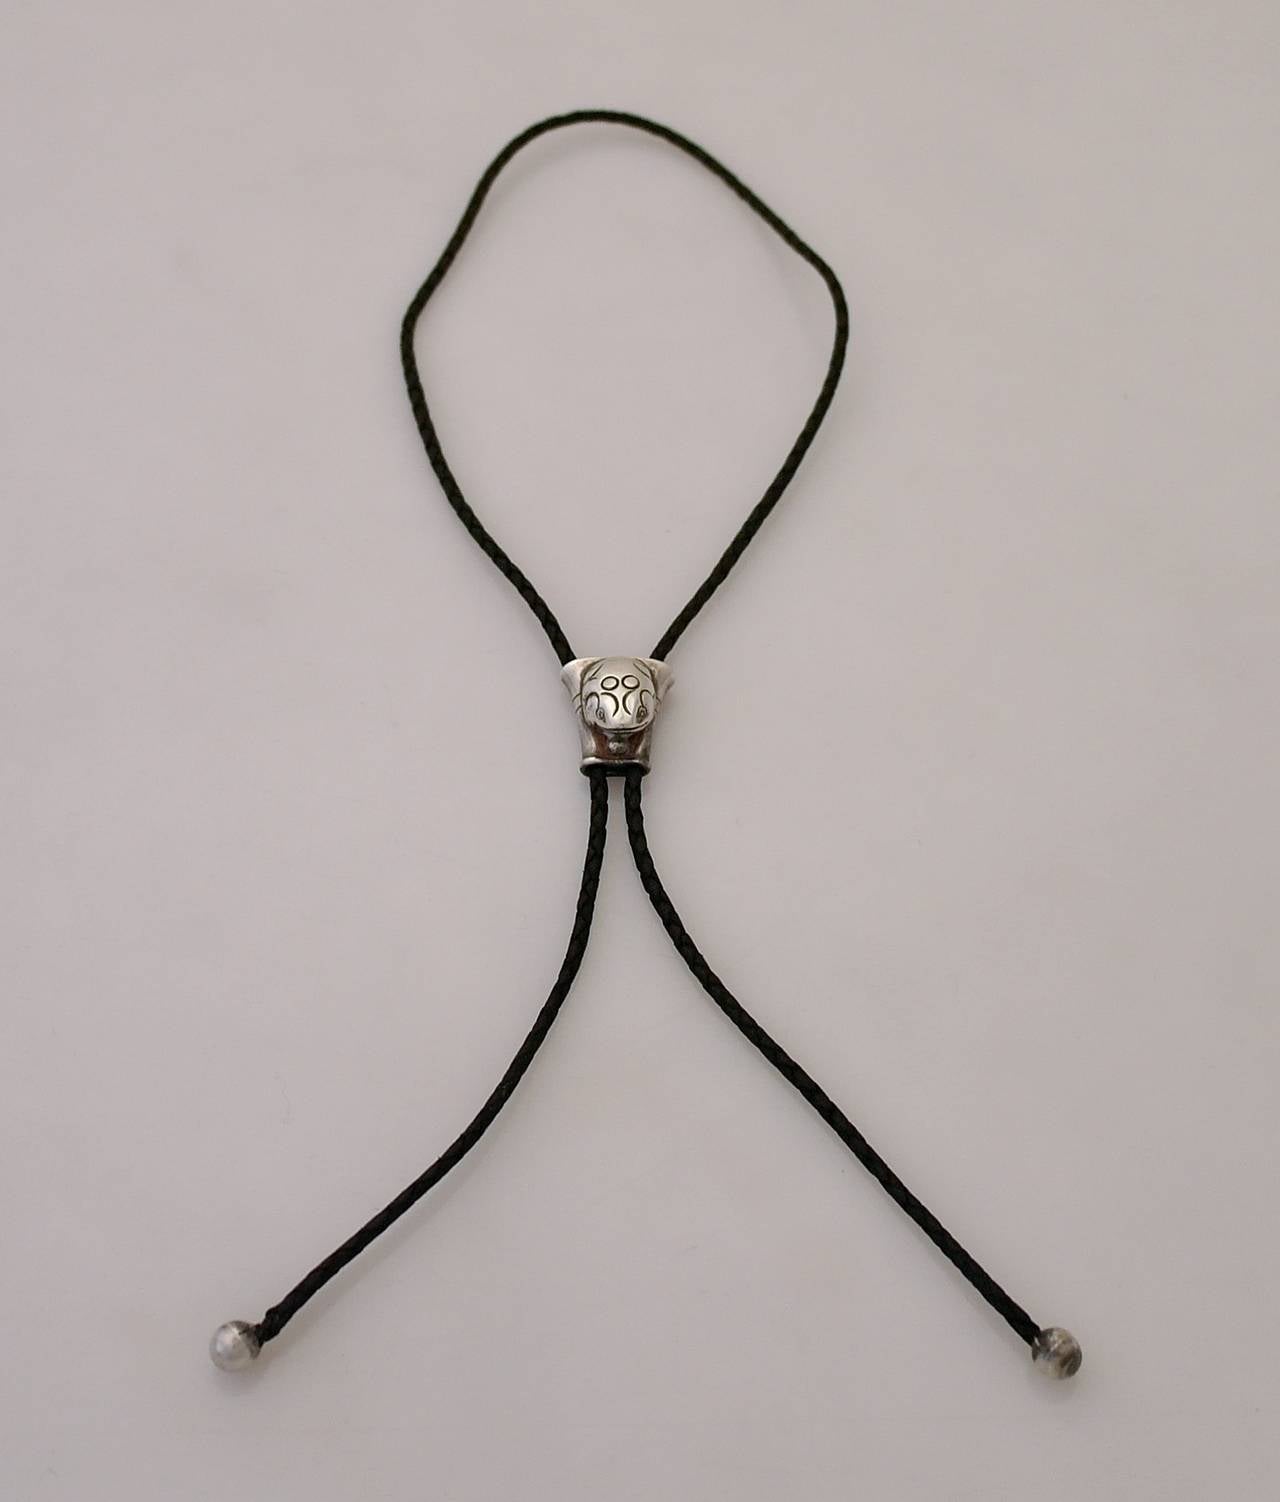 Being offered is a rare circa 1964 sterling silver and leather bolo tie designed by William Spratling of Taxco, Mexico, the woven leather tie (measuring 39 inches long) is supported by a hand made bolo accented by an applied frog motif with incised